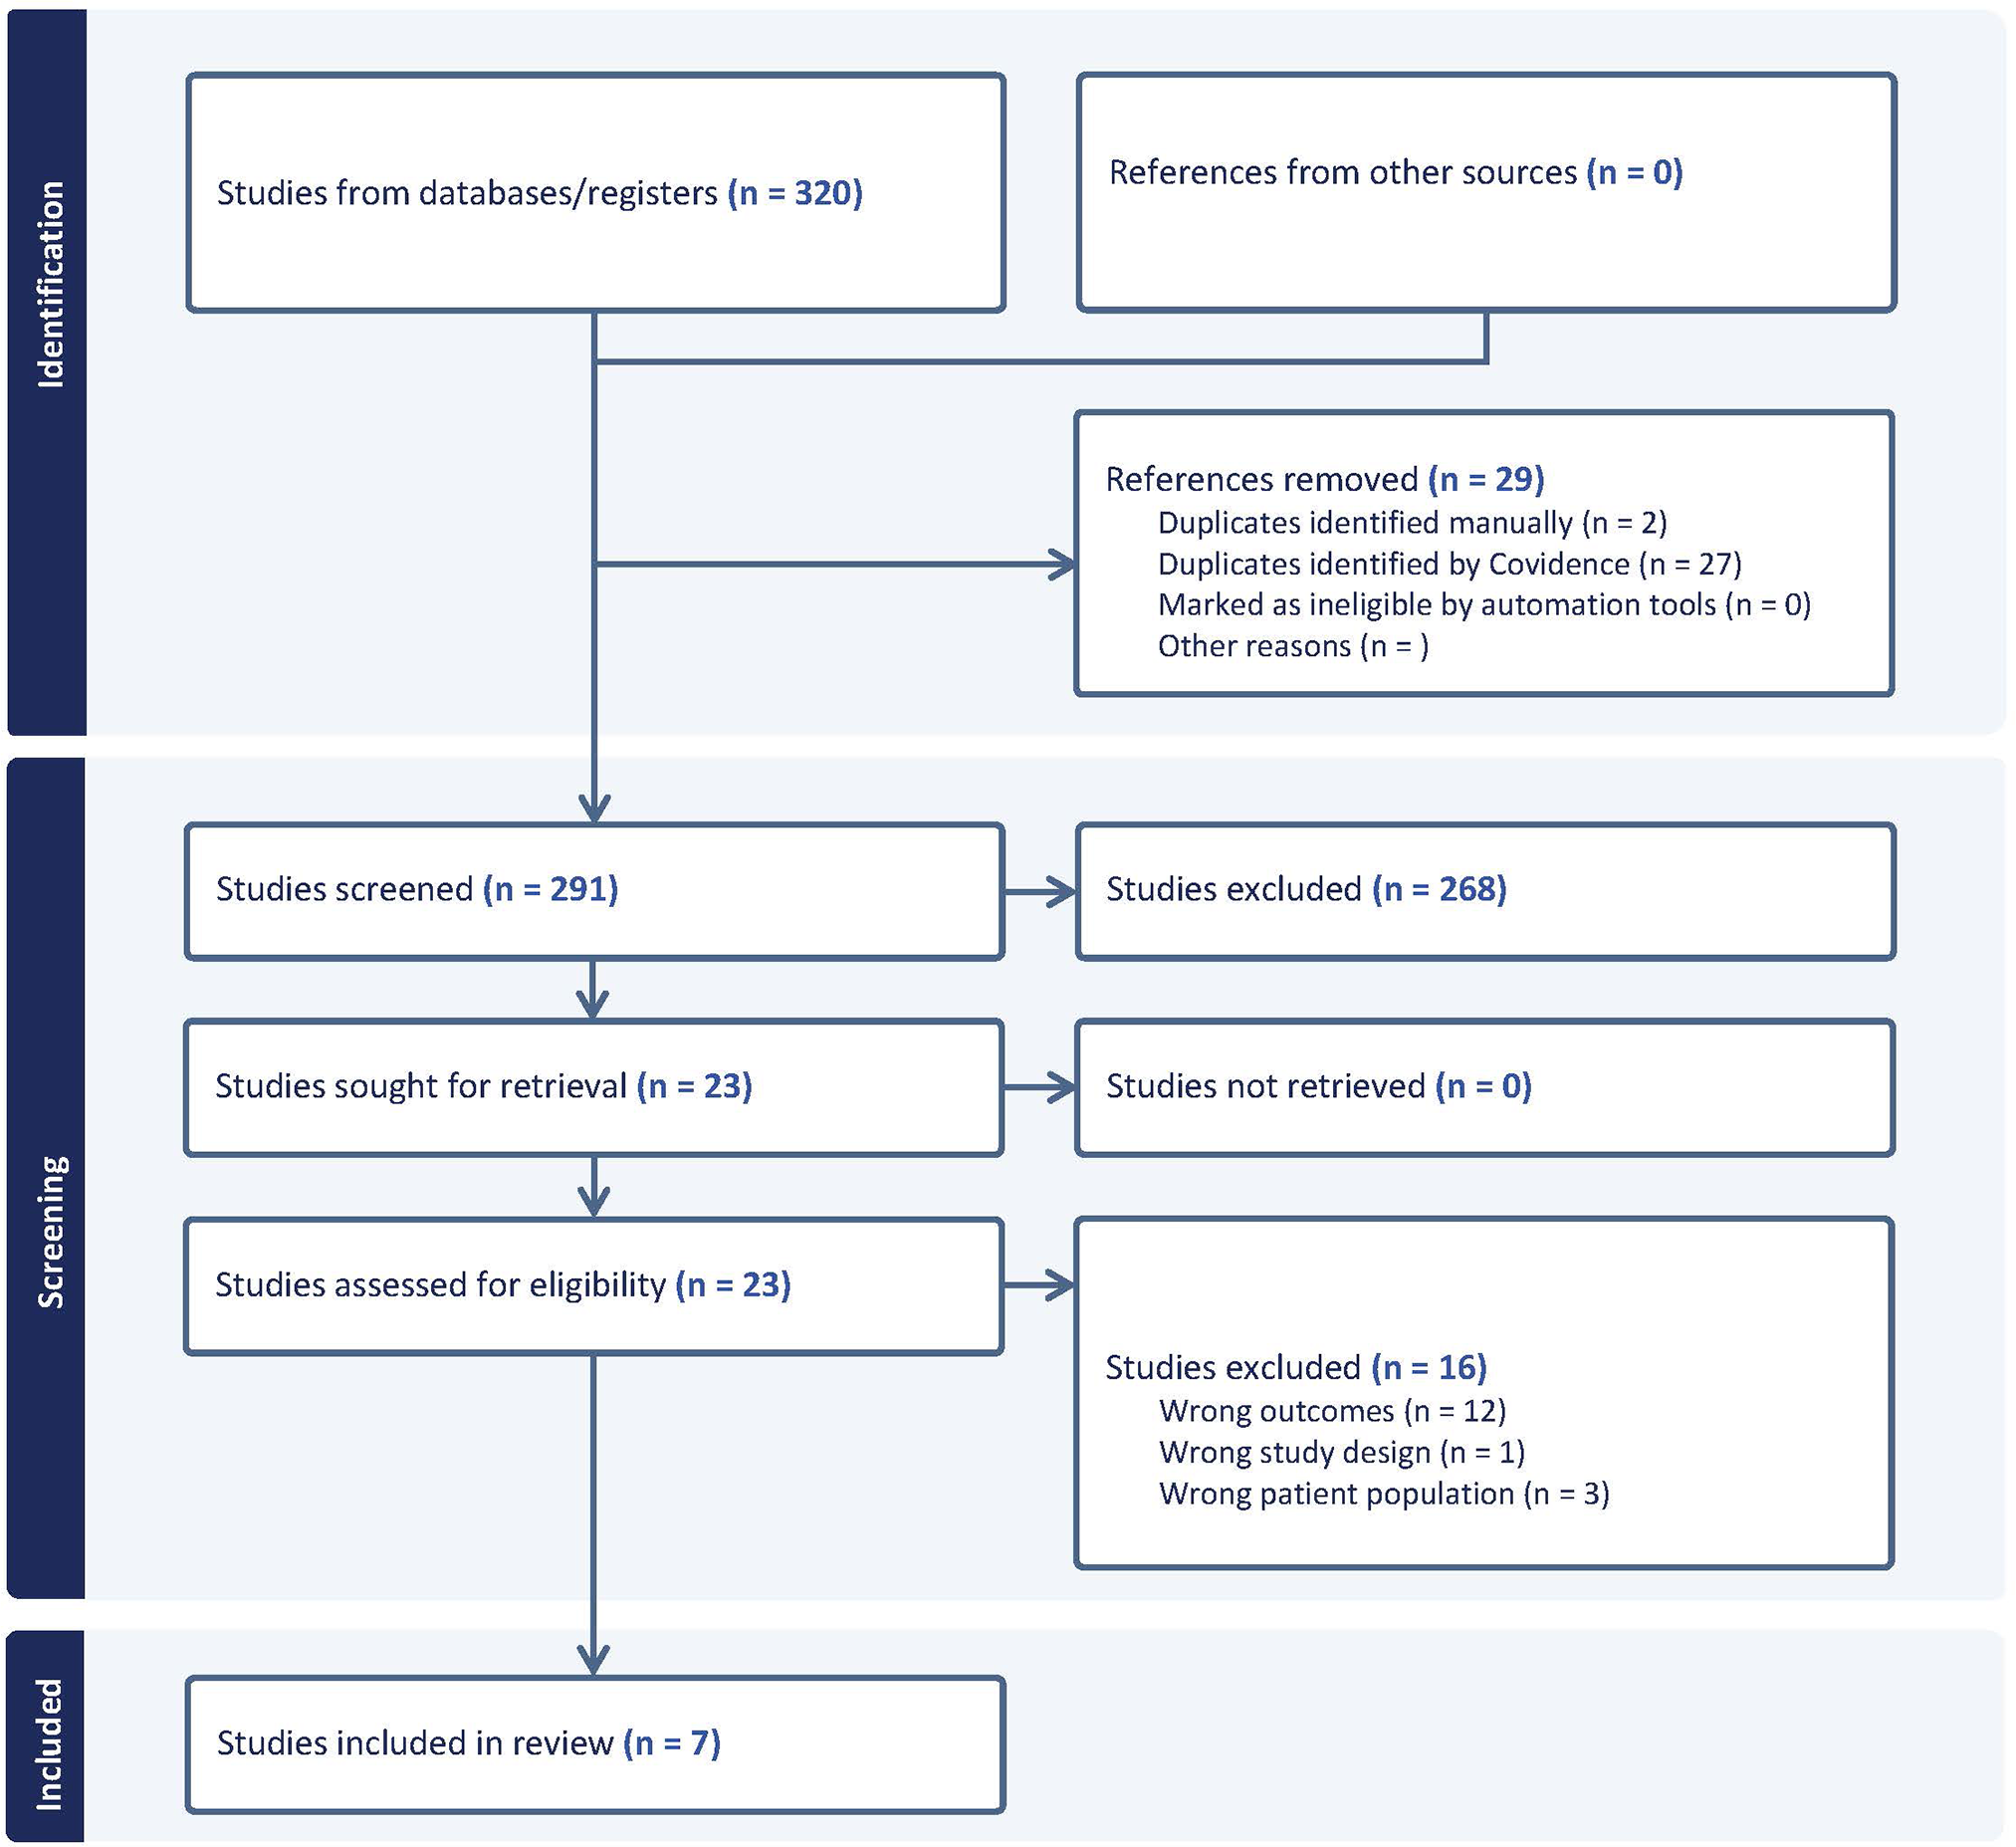 The incidence of major bleeding in adult patients with urogenital and gynecological cancer being treated with direct oral anticoagulants (DOACs): a systematic review